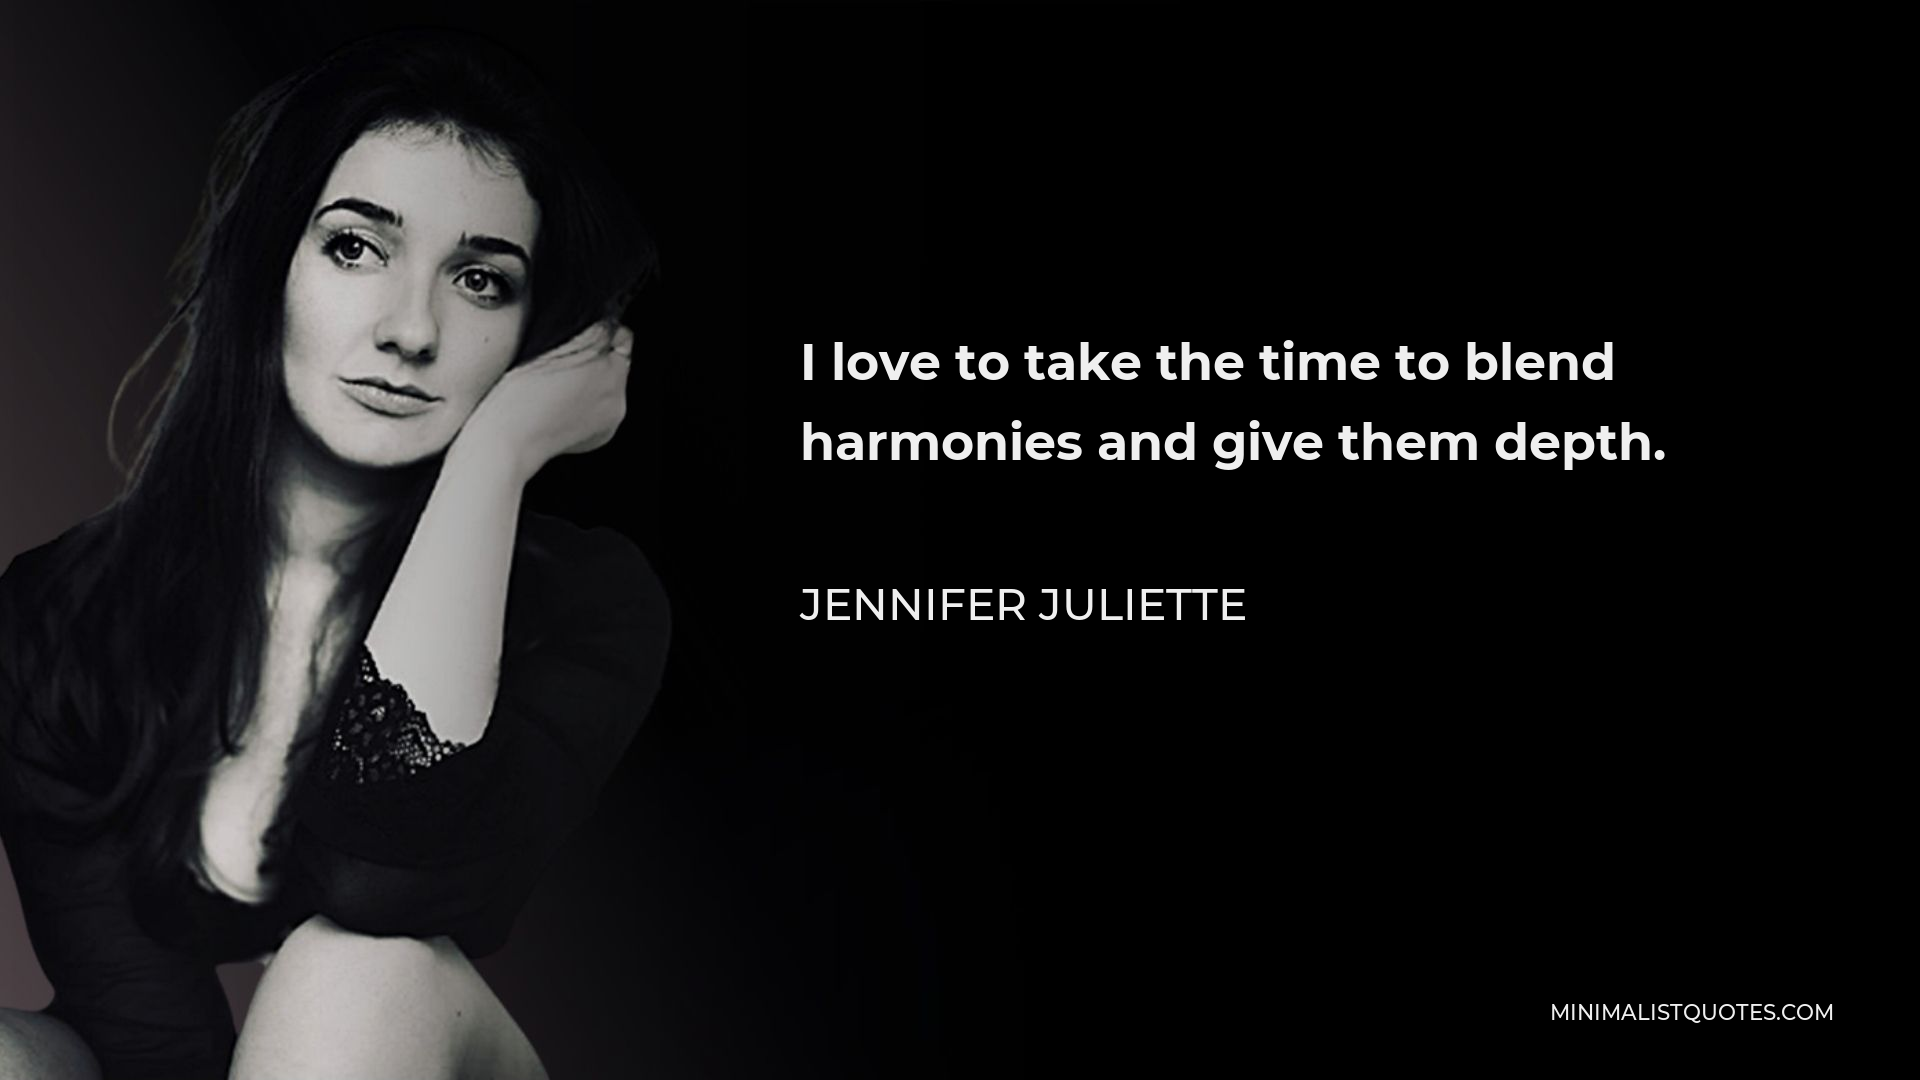 Jennifer Juliette Quote - I love to take the time to blend harmonies and give them depth.